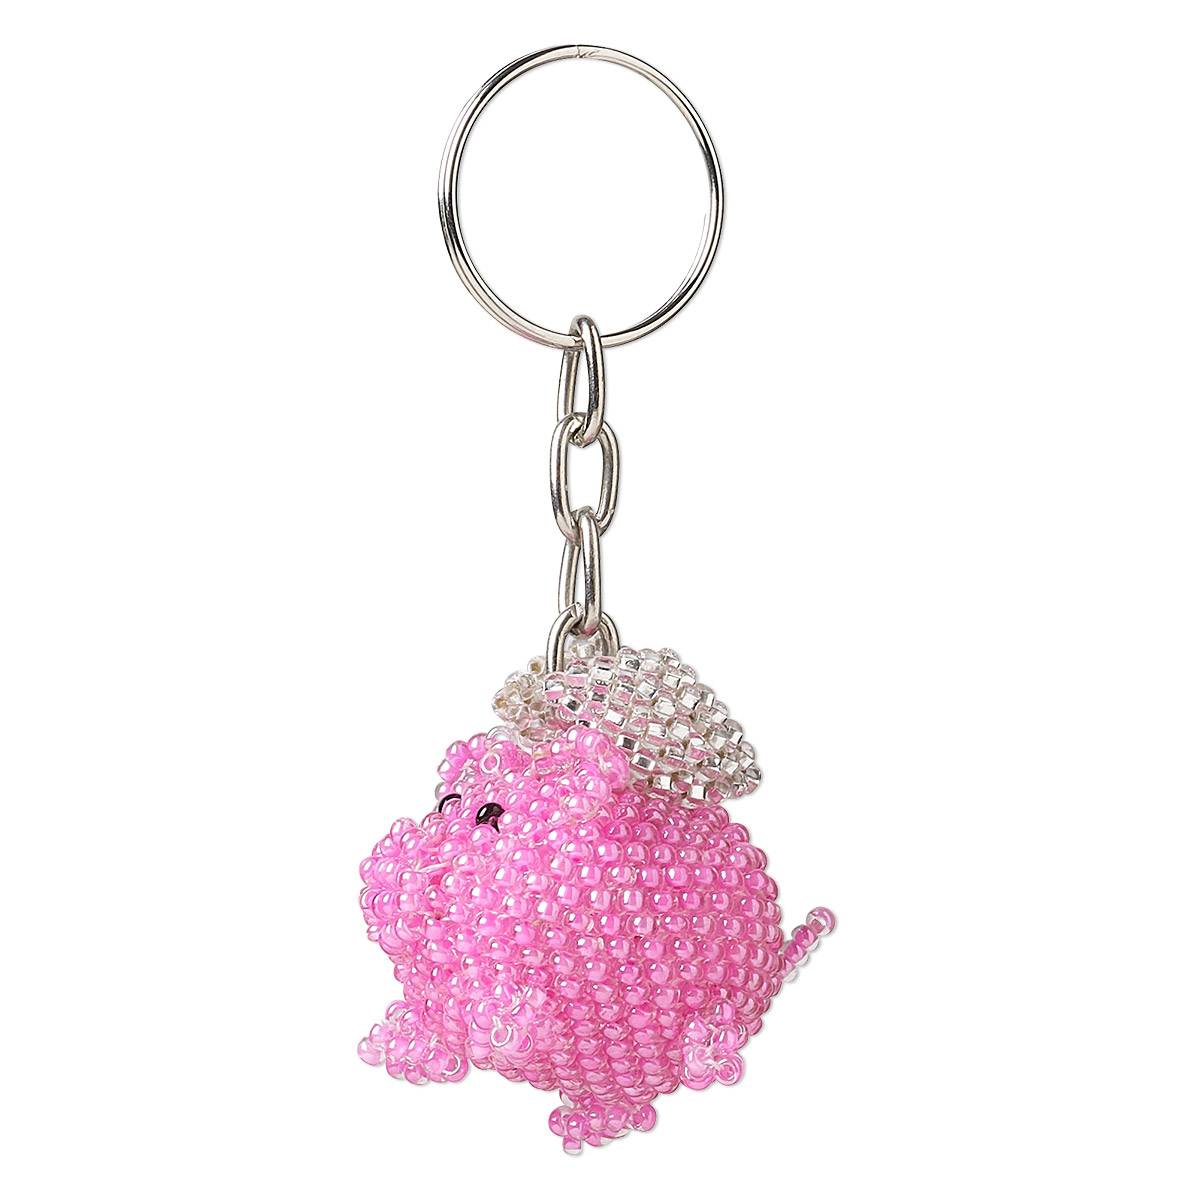 Keychain, nylon / glass / stainless steel, multicolored, 34x32x24mm ...